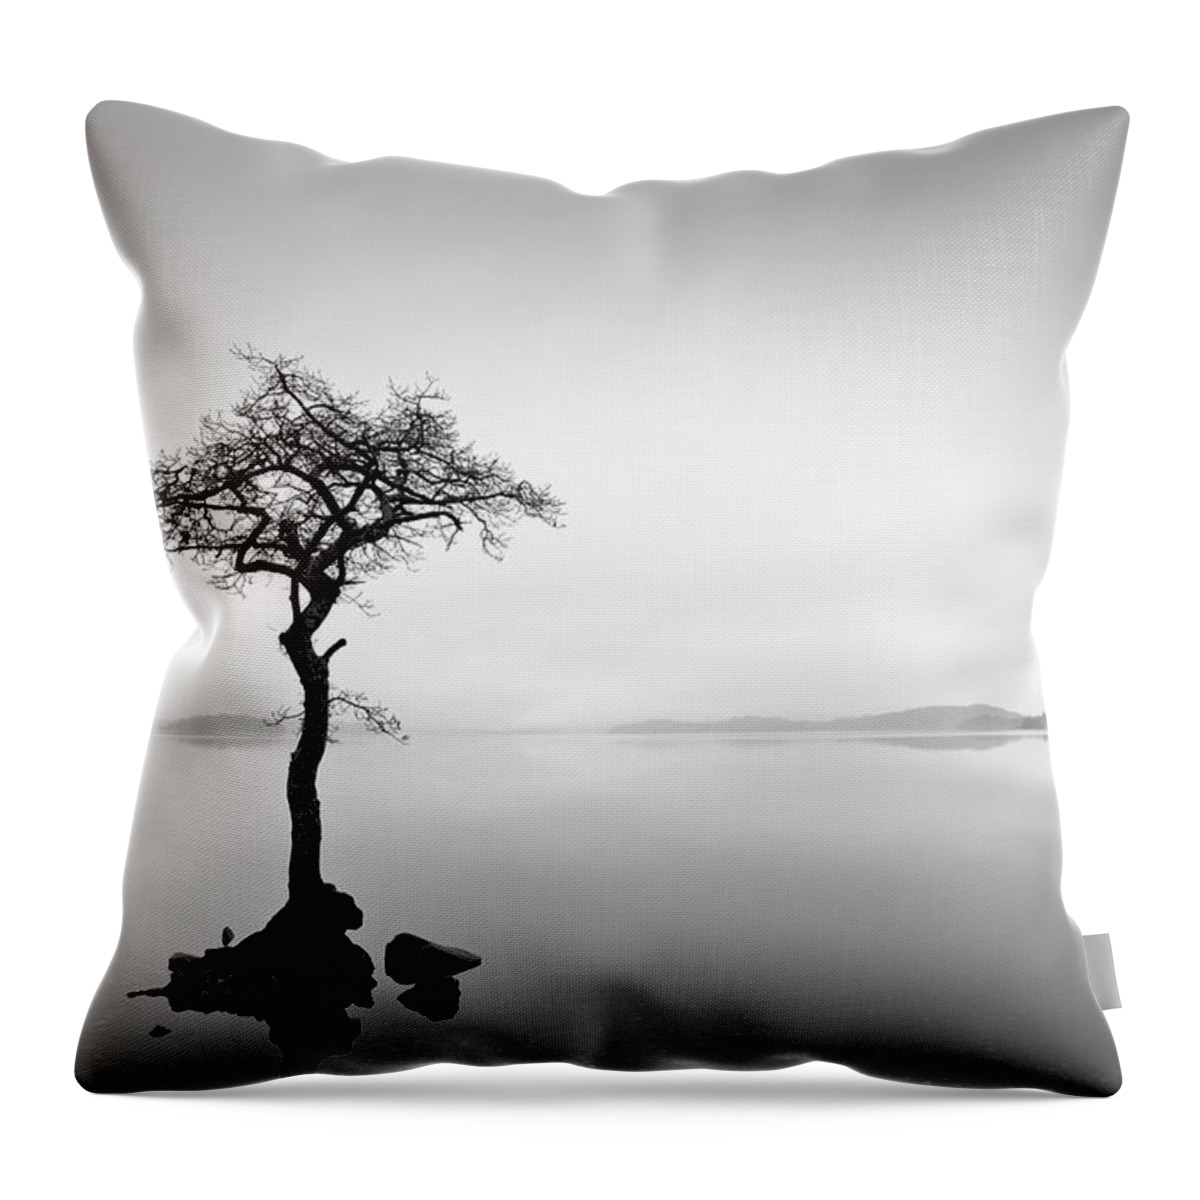 Scenics Throw Pillow featuring the photograph Loch Lomond Tree by Billy Currie Photography